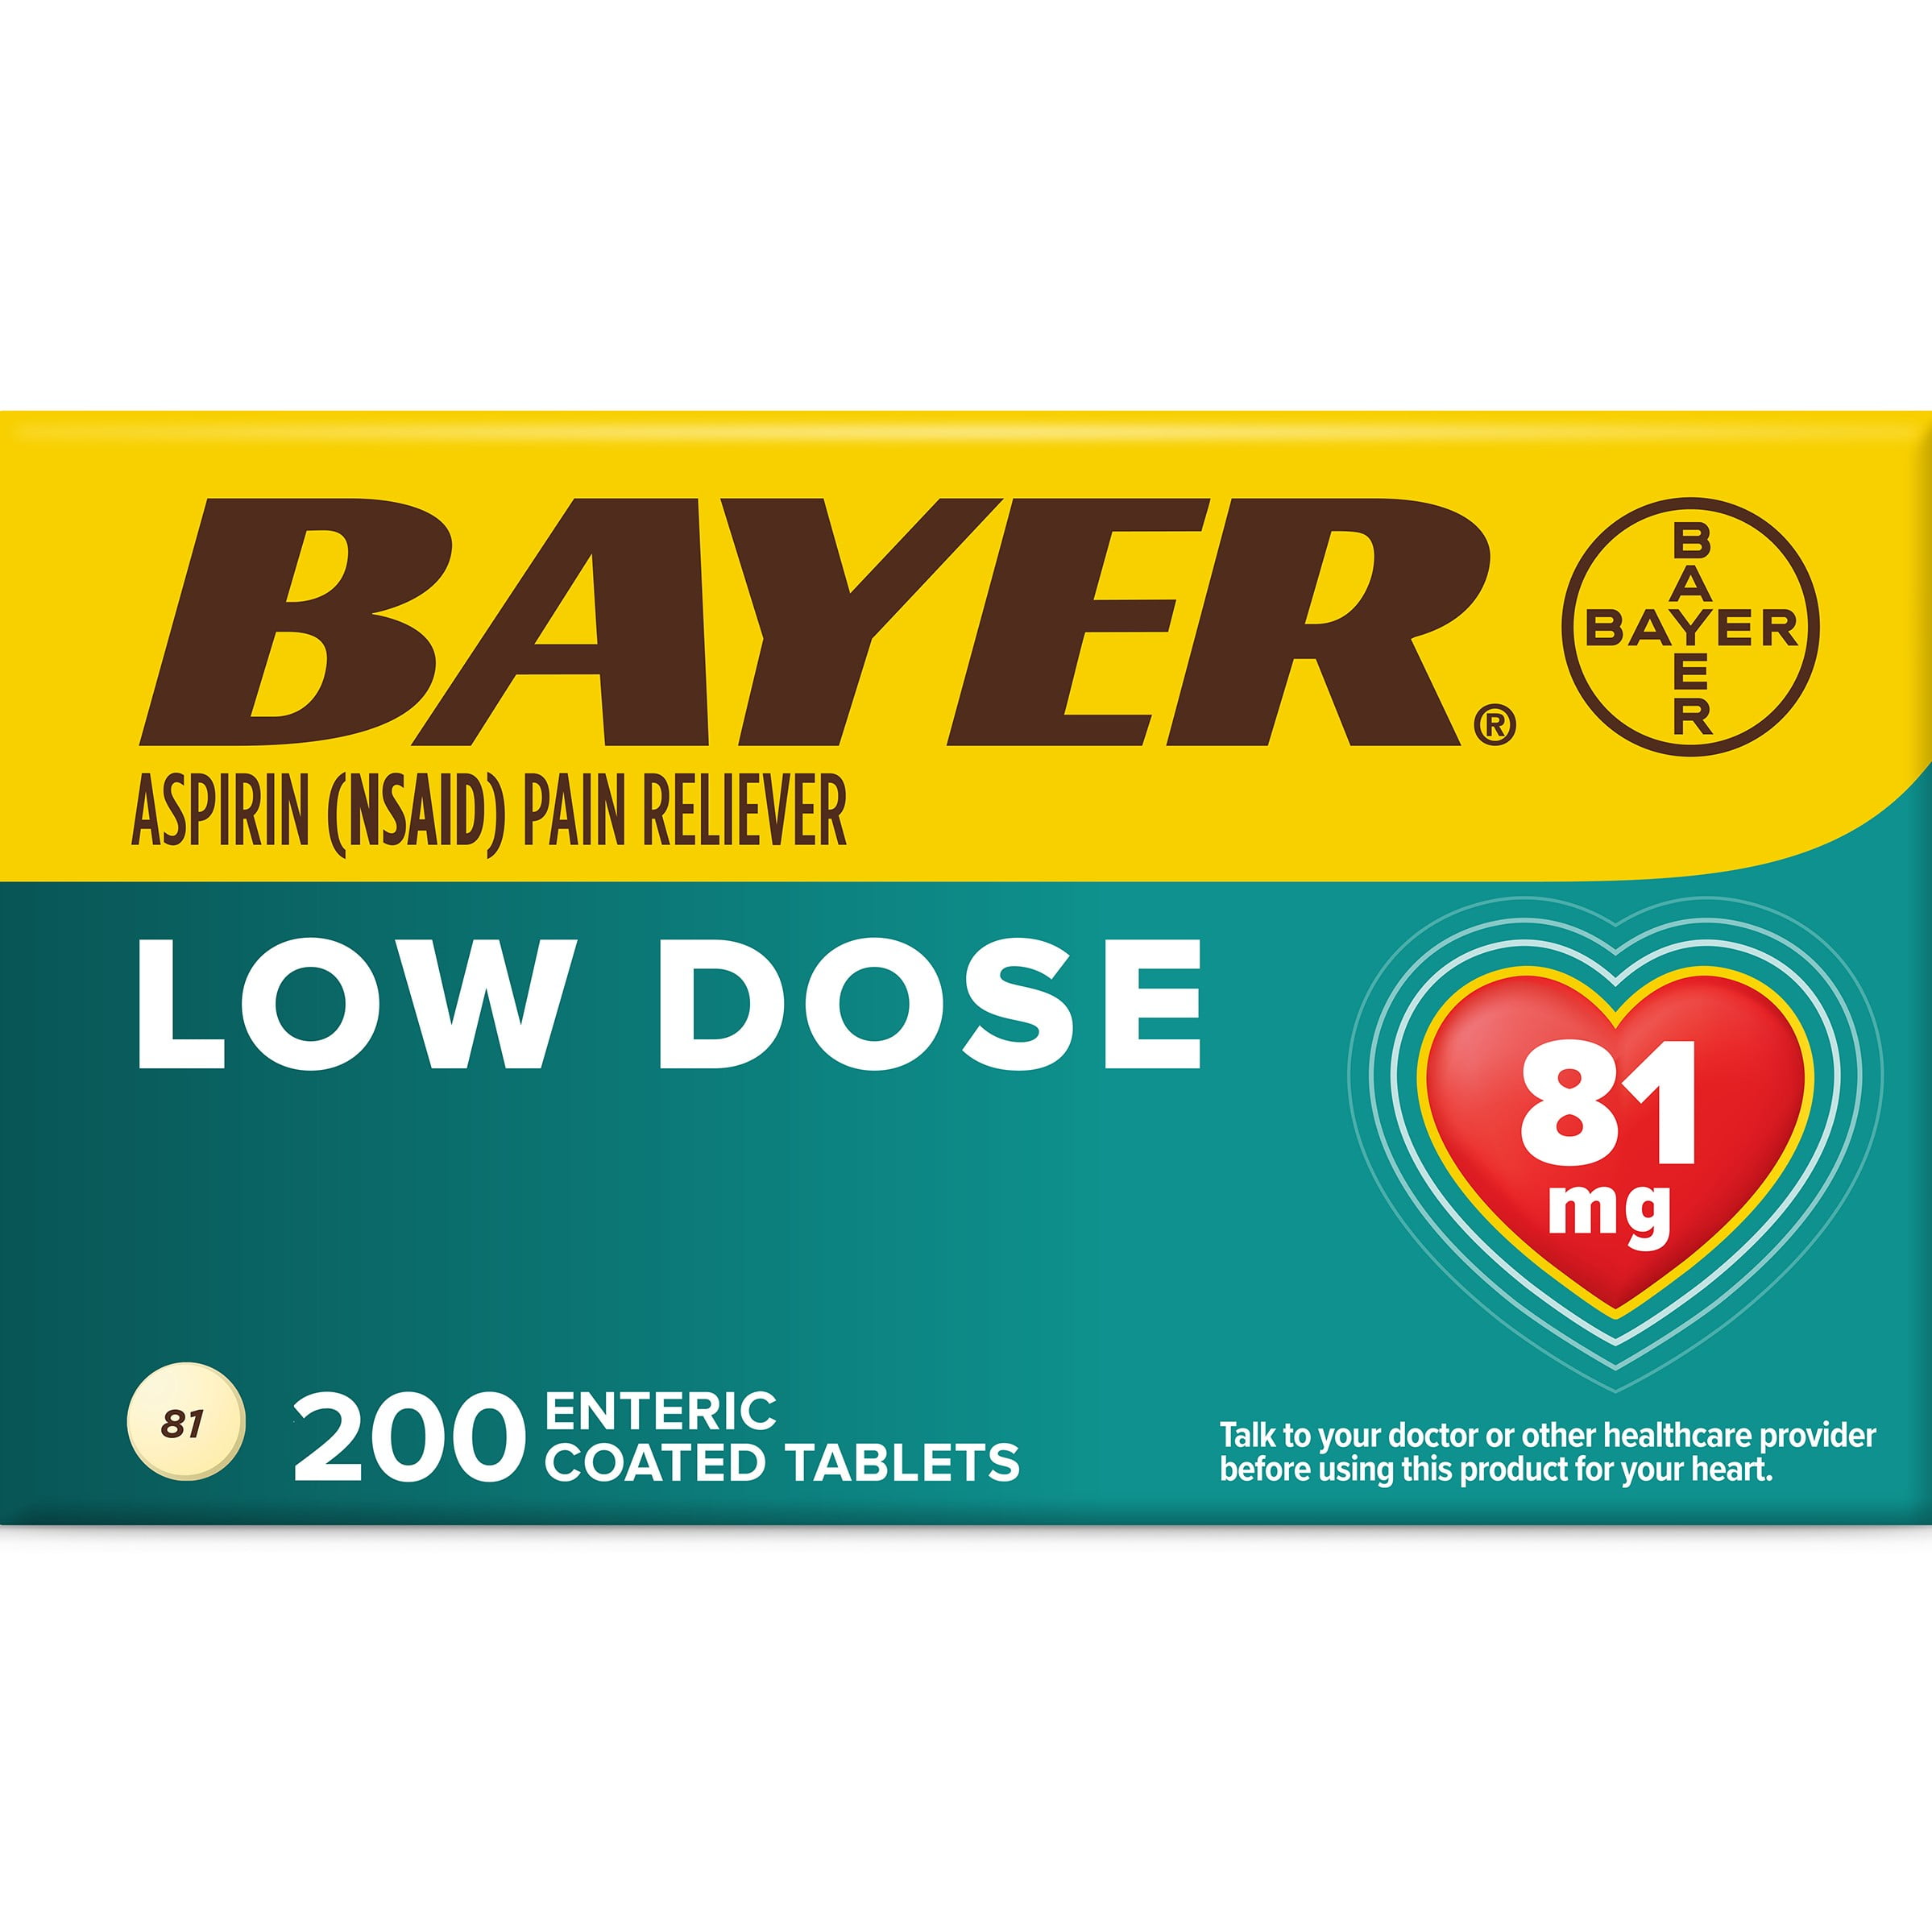 Aspirin Regimen Bayer Low Dose Pain Reliever Enteric Coated Tablets, 81mg, 200 Ct